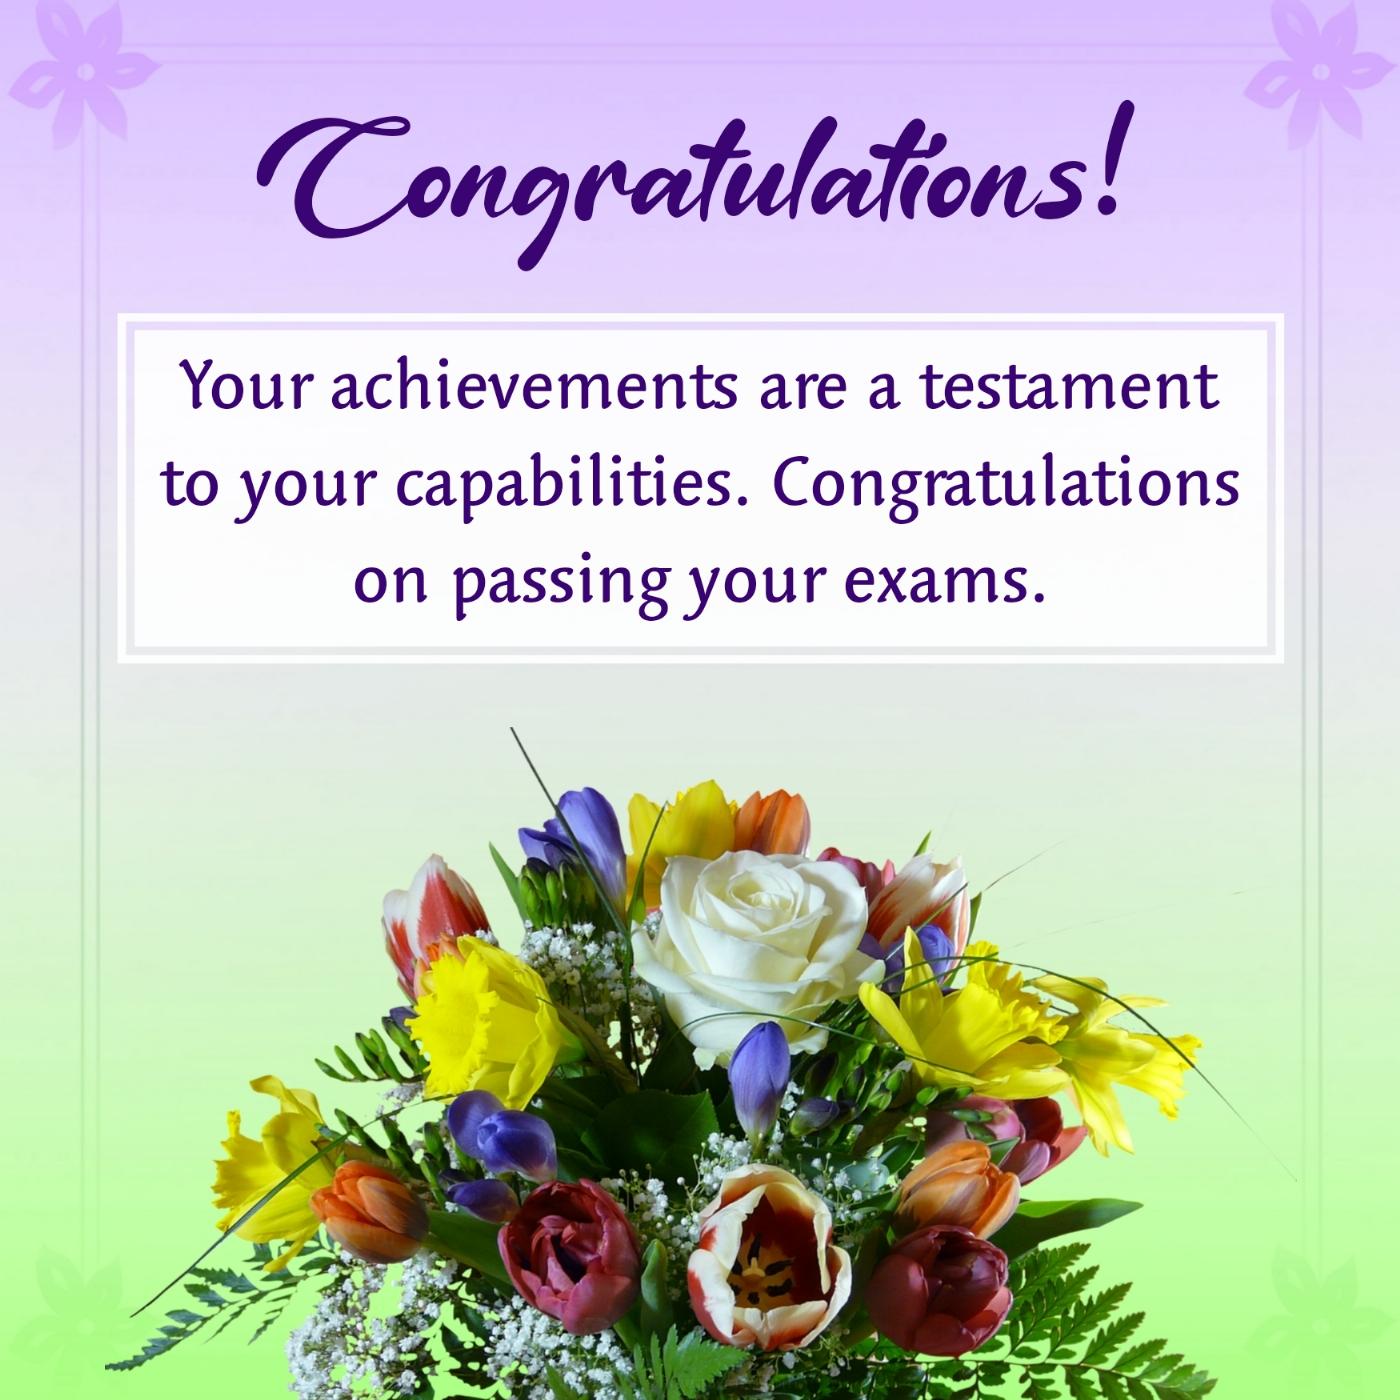 Your achievements are a testament to your capabilities